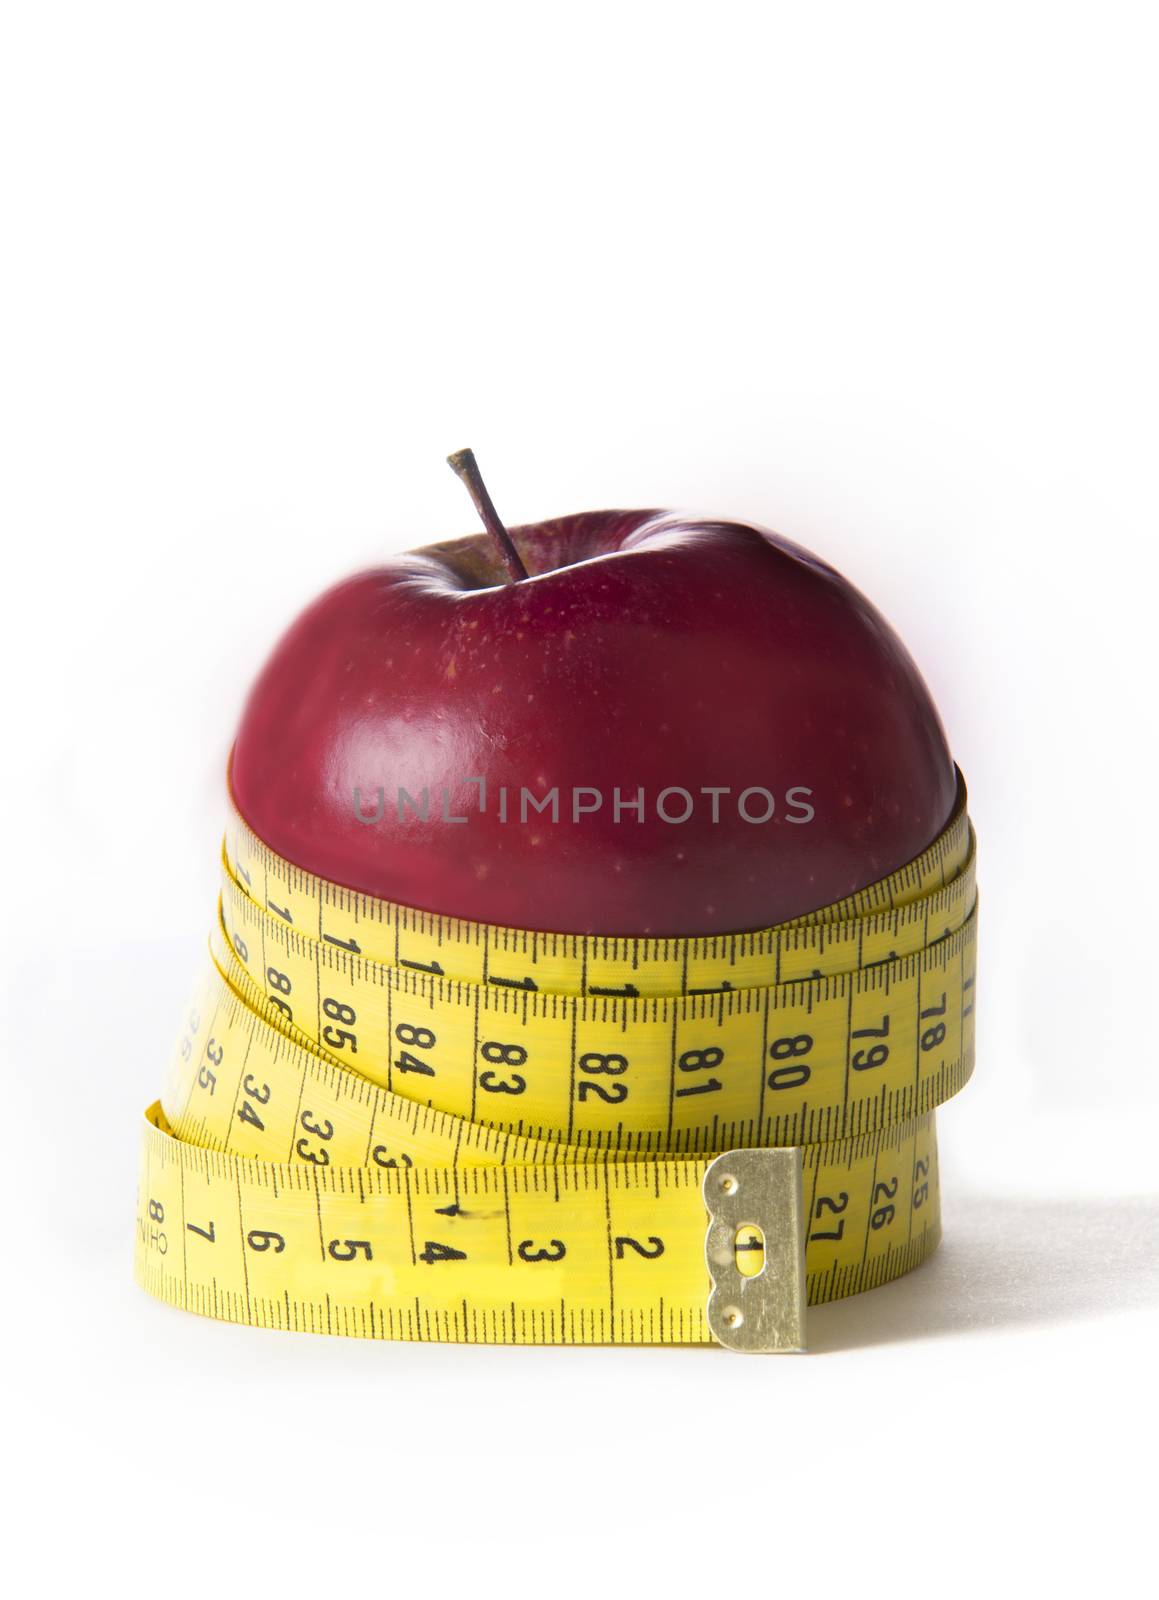 Apple wrapped in tailor tape in concept of Diet and Health